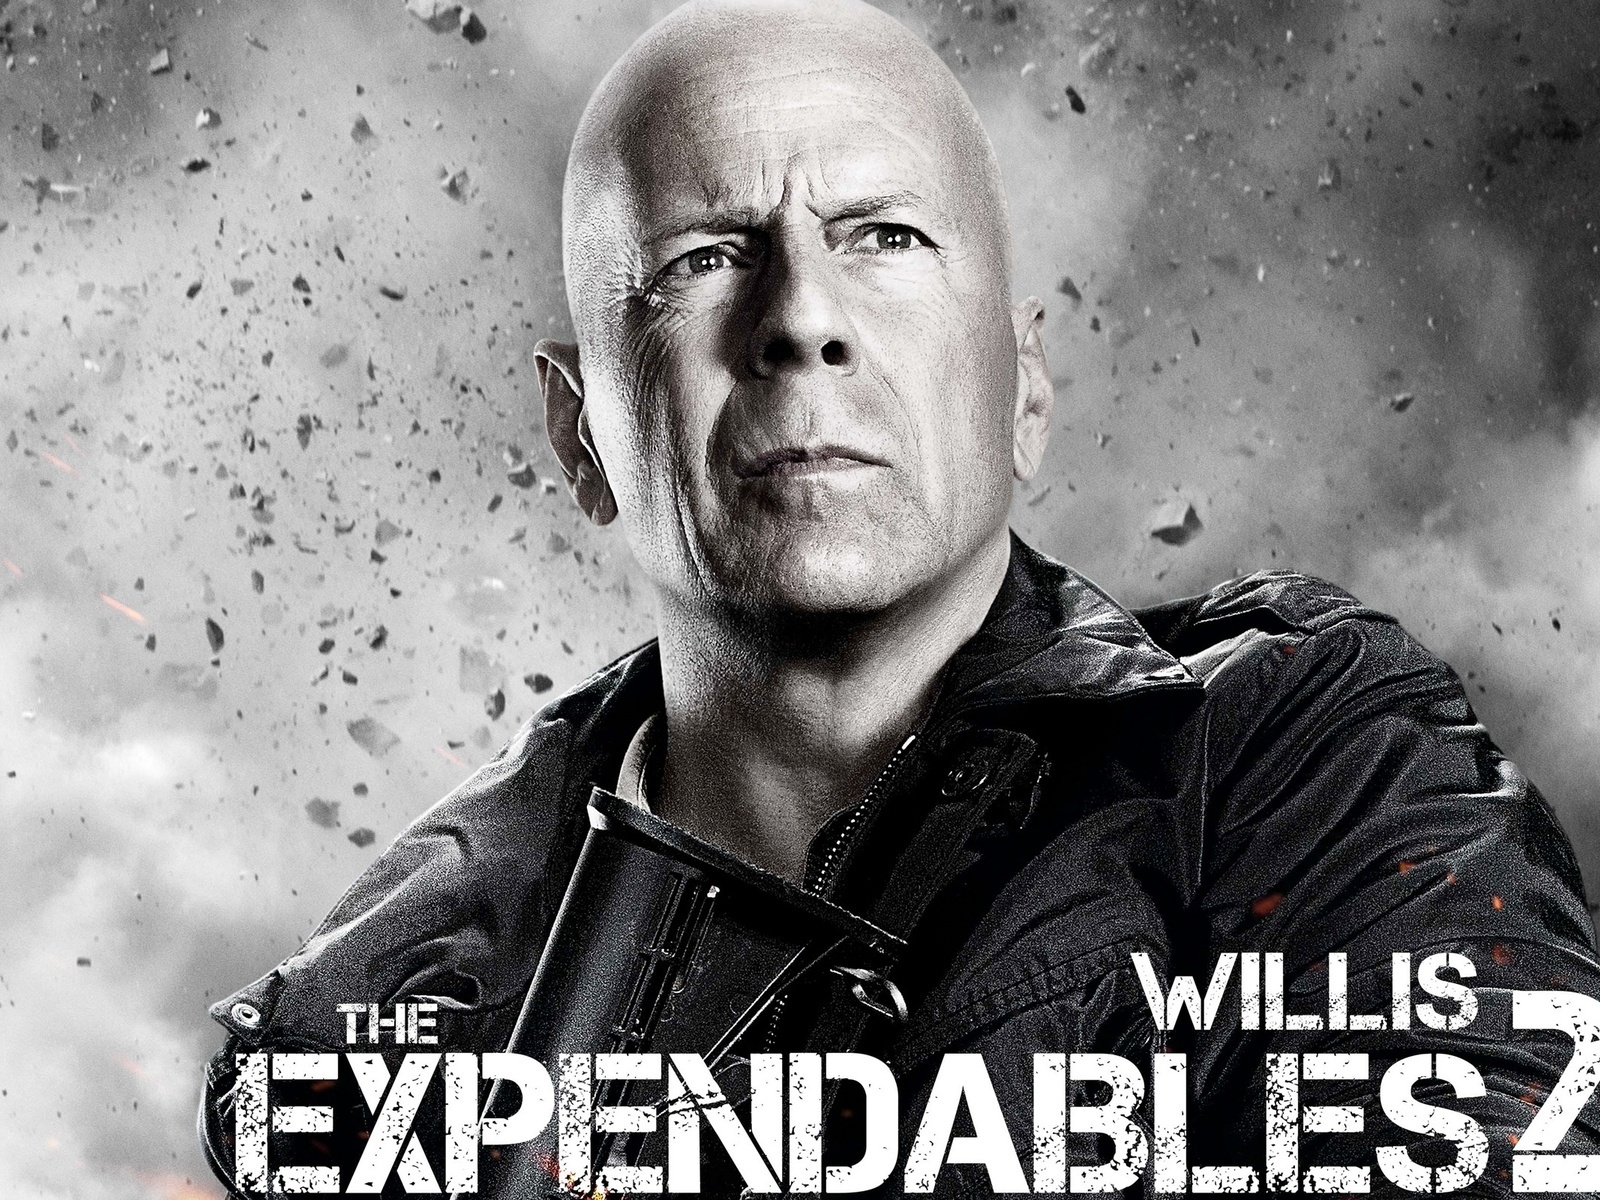 Bruce Willis Expendables 2 for 1600 x 1200 resolution